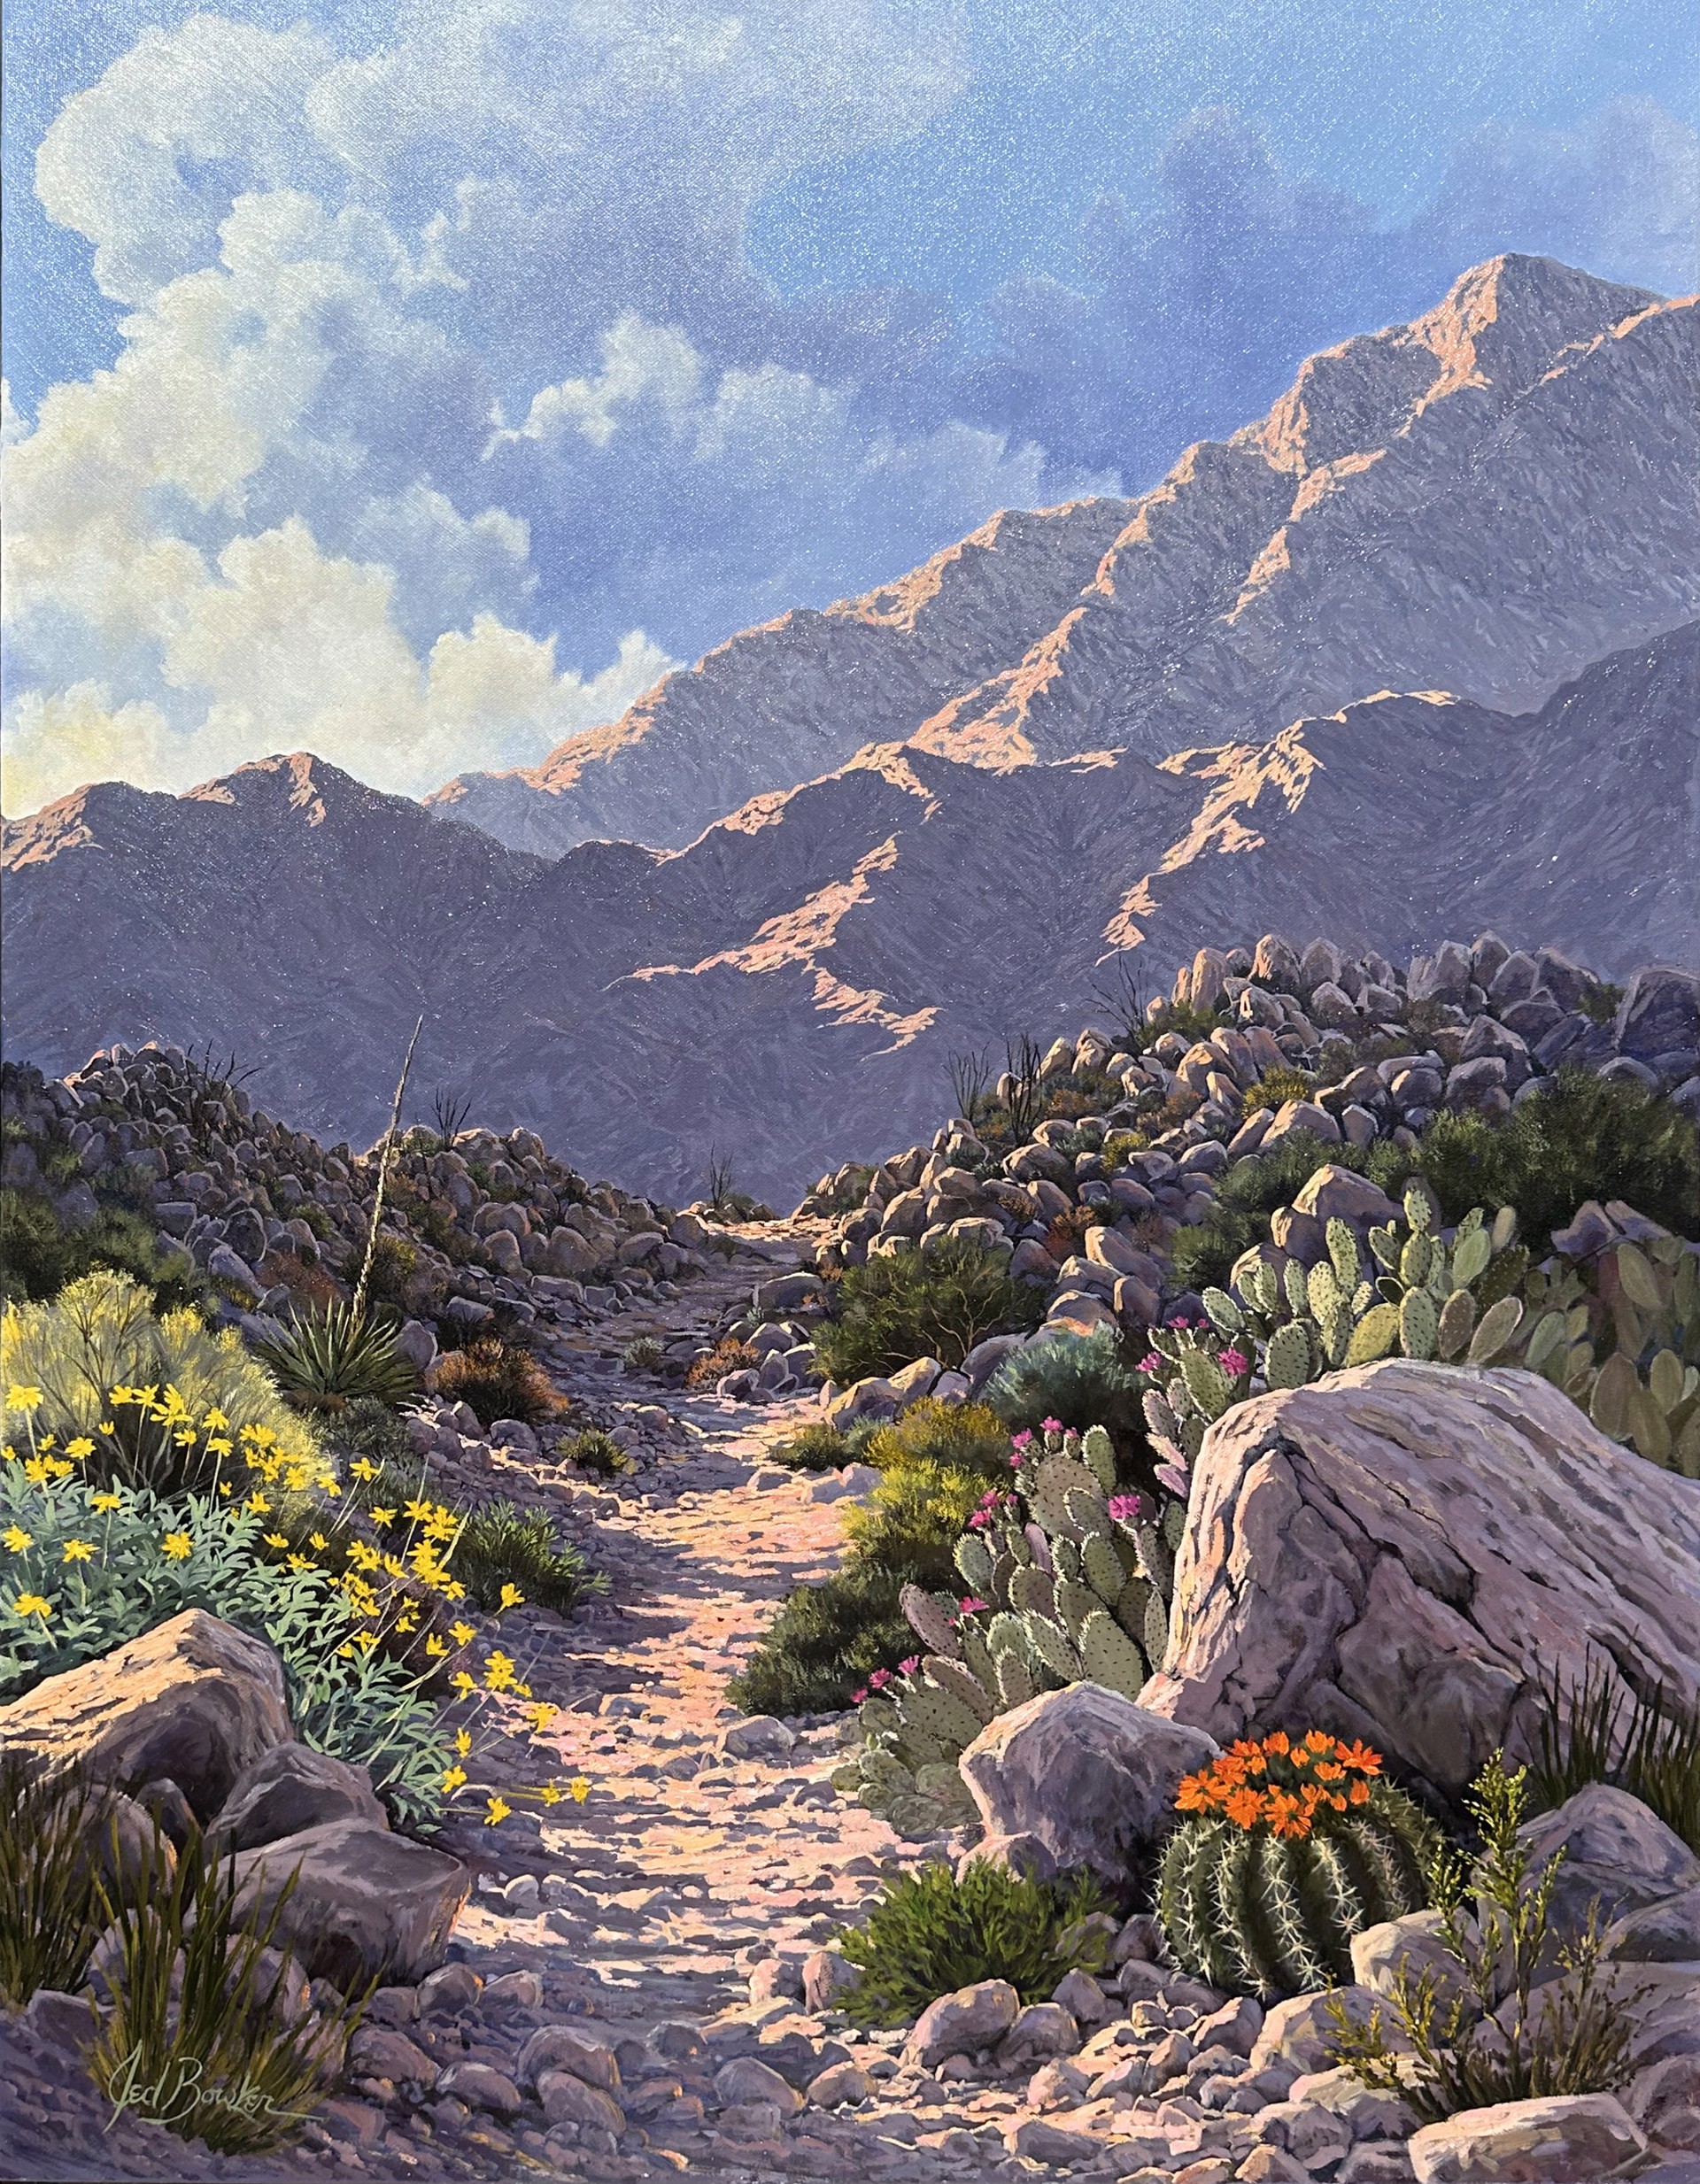 Tahquitz Canyon Trail by Jed Bowker